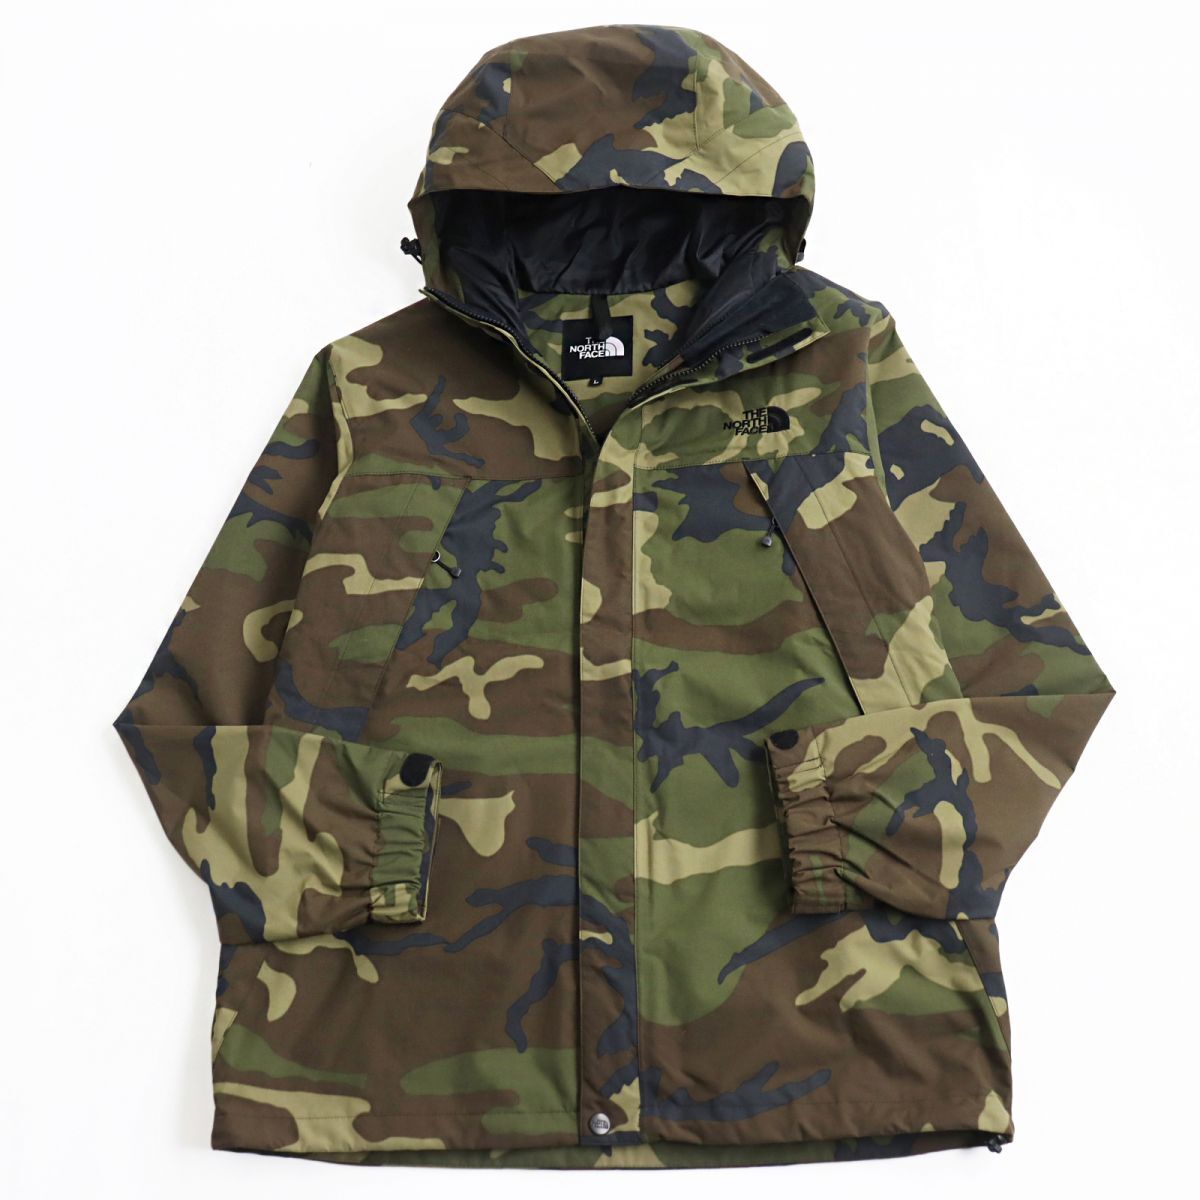 Mサイズ THE NORTH FACE NOVELTY SCOOP JACKET